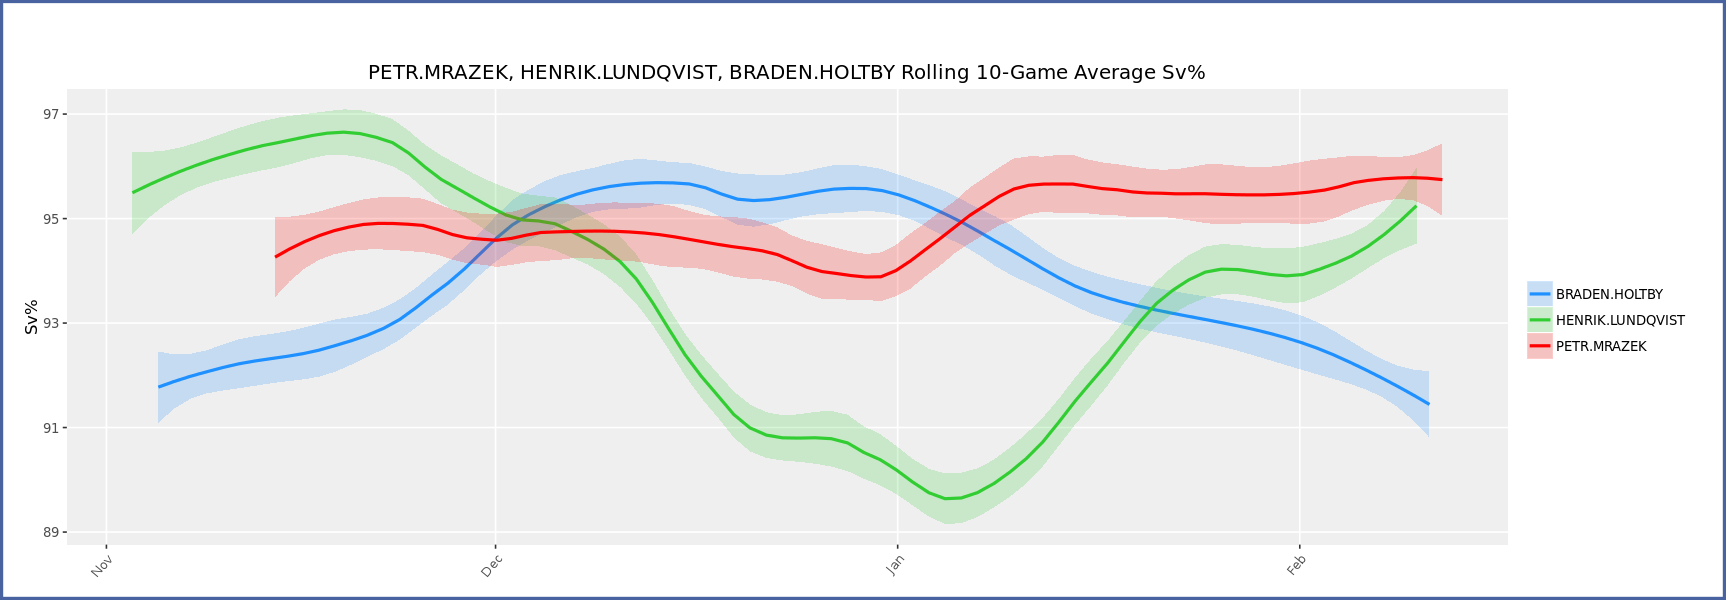 Mrazek_vs_Lundquist_vs_Holtby.0.png